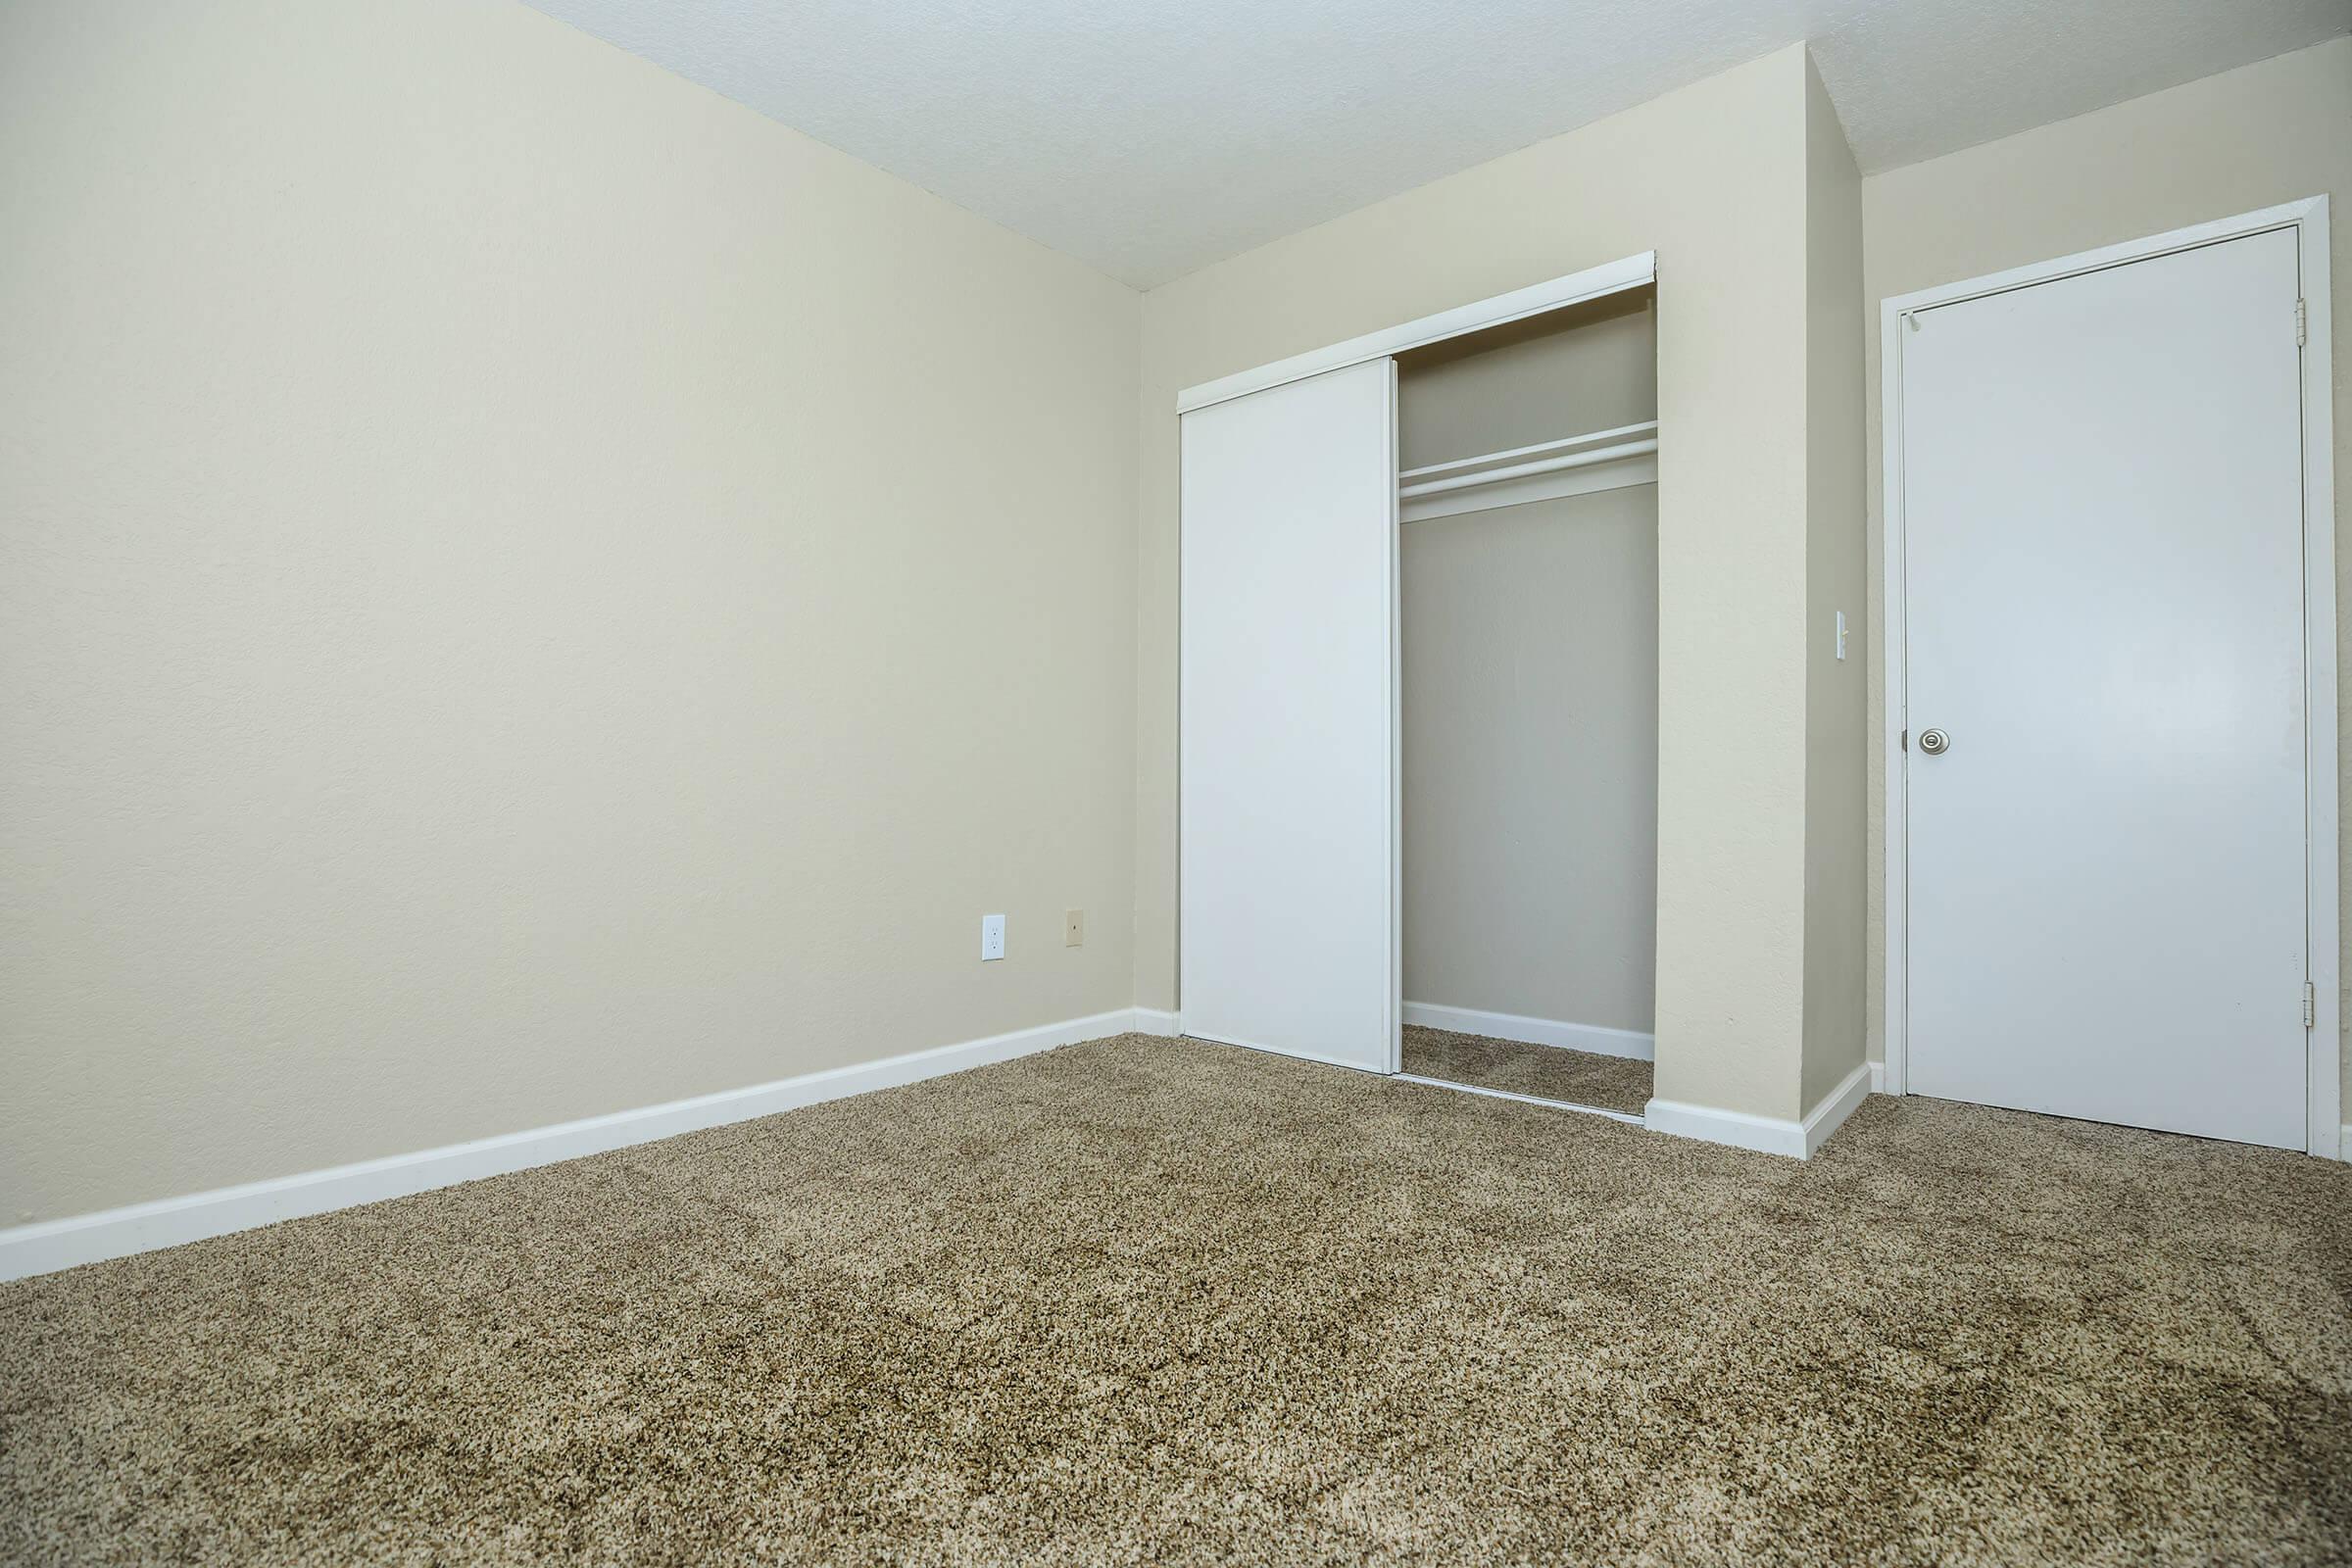 Vacant carpeted bedroom with open sliding closet doors